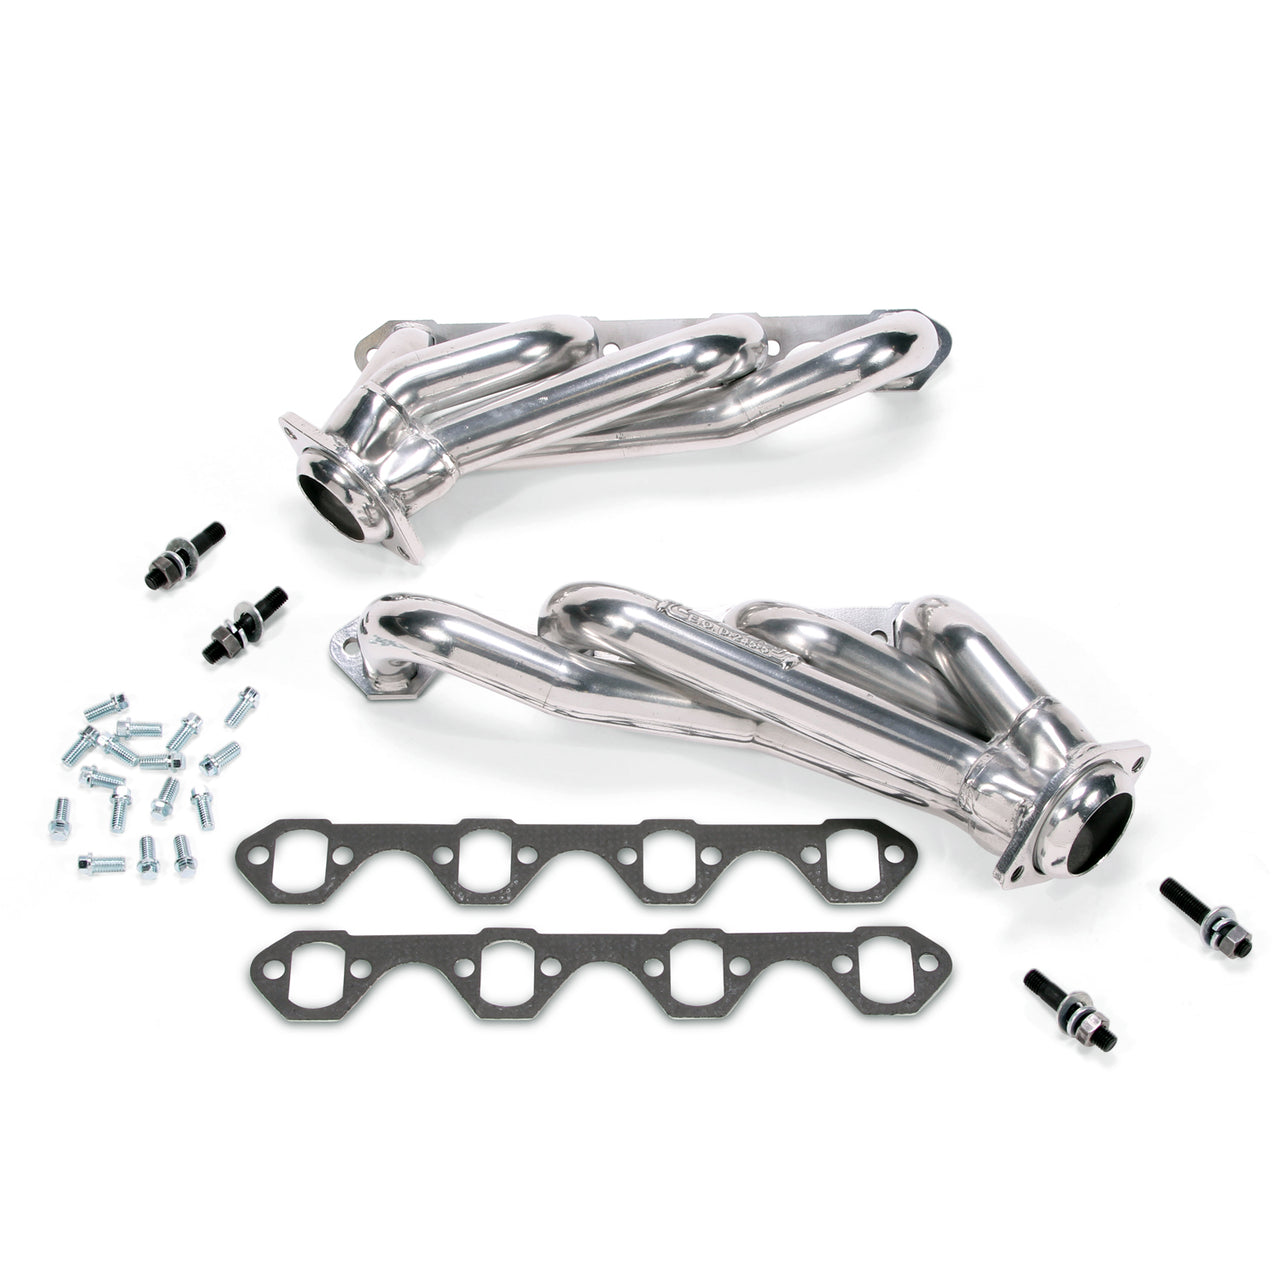 1986-1993 MUSTANG 5.0L 1-5/8 SHORTY HEADERS (POLISHED SILVER CERAMIC)